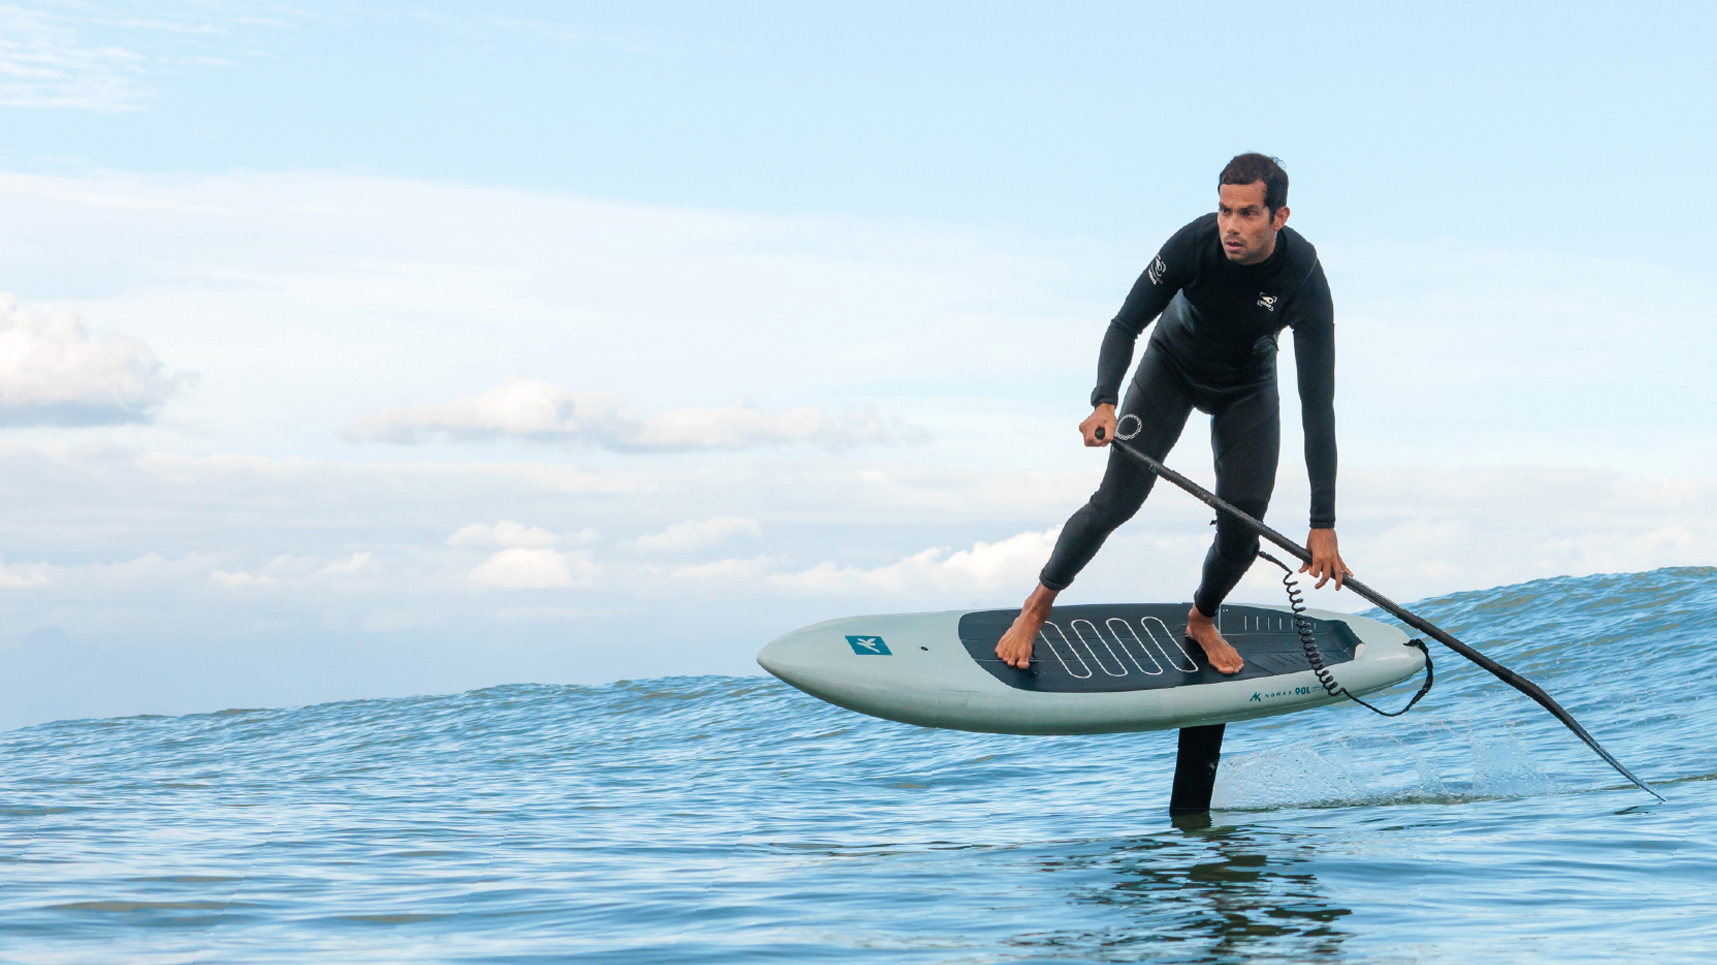 akdurablesupplyco-AK Tracer Hydrofoil Victor Hays SUP Foiling 1The Next RevolutionNews